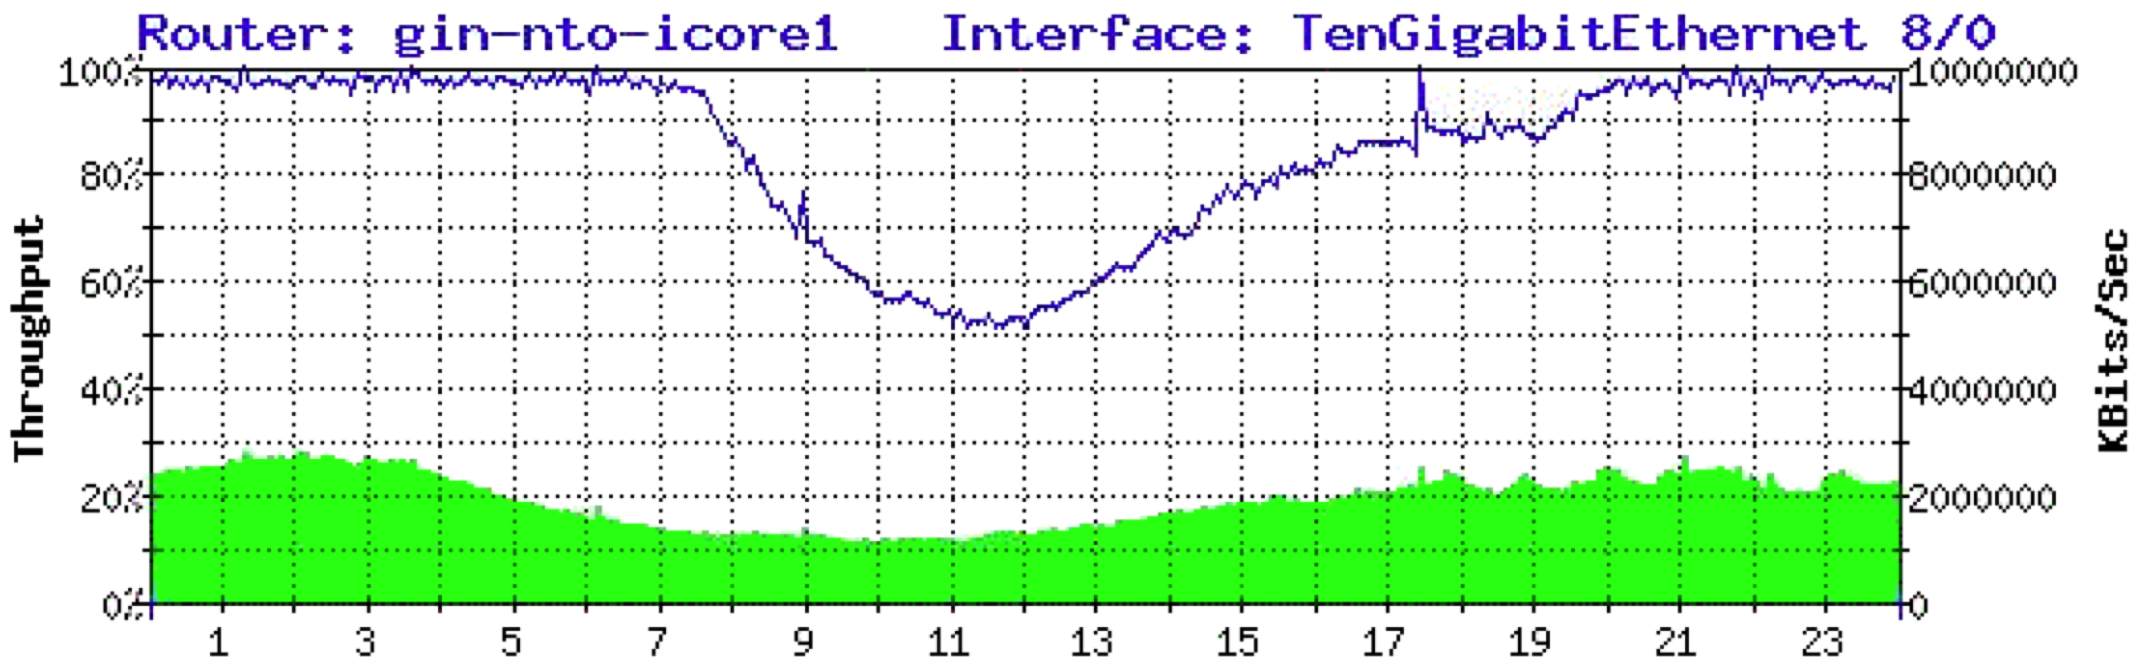 upstream congested graph